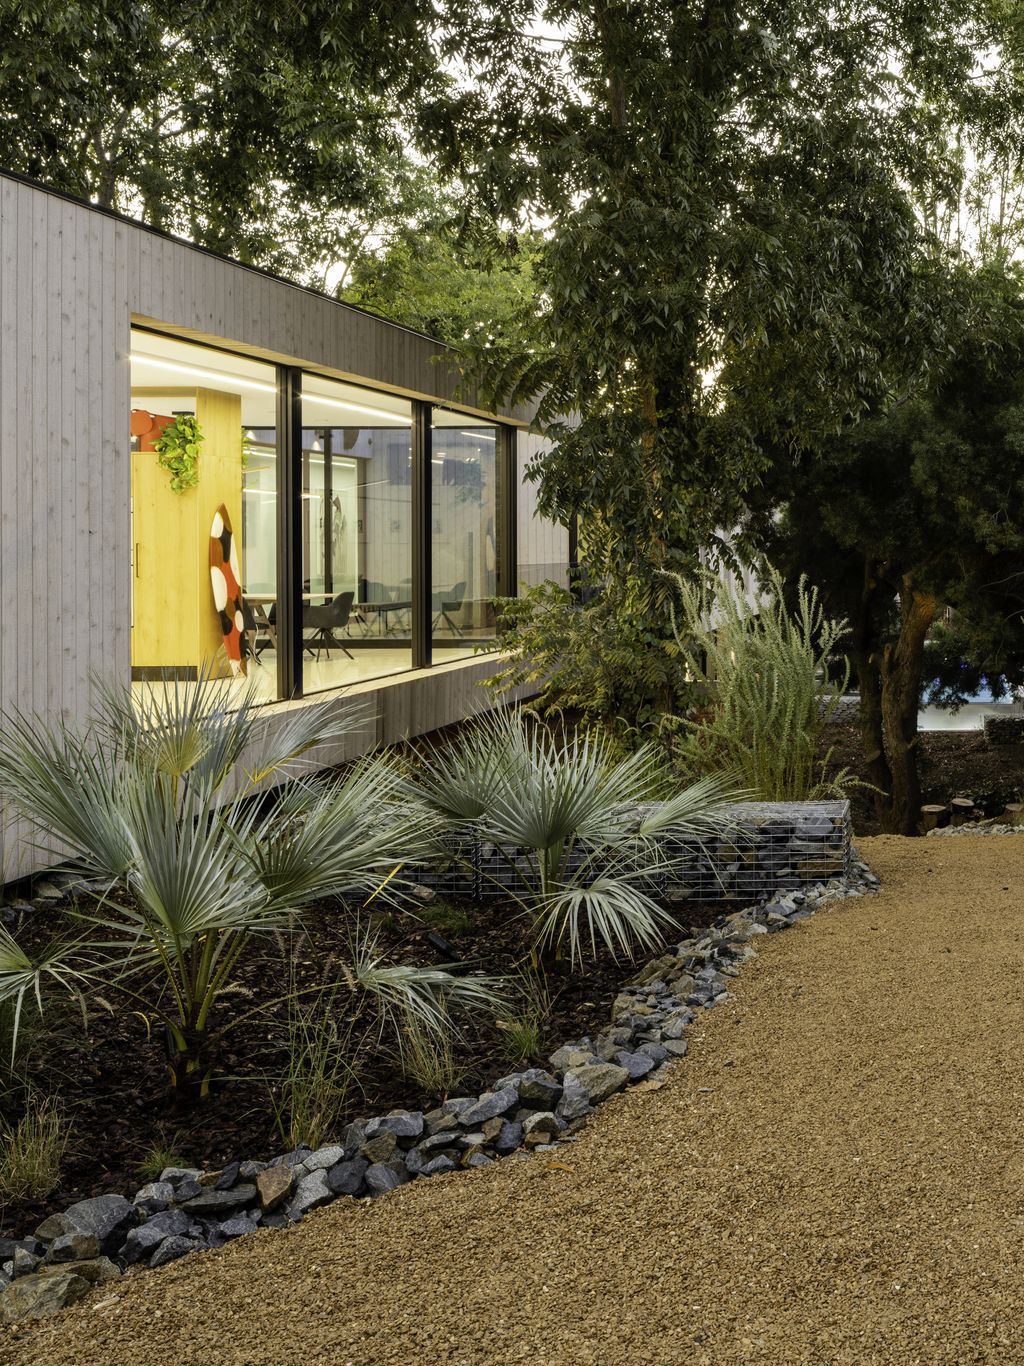 Bridge-House-Nestled-in-Nature-in-Los-Angeles-by-Dan-Brunn-Architecture-1